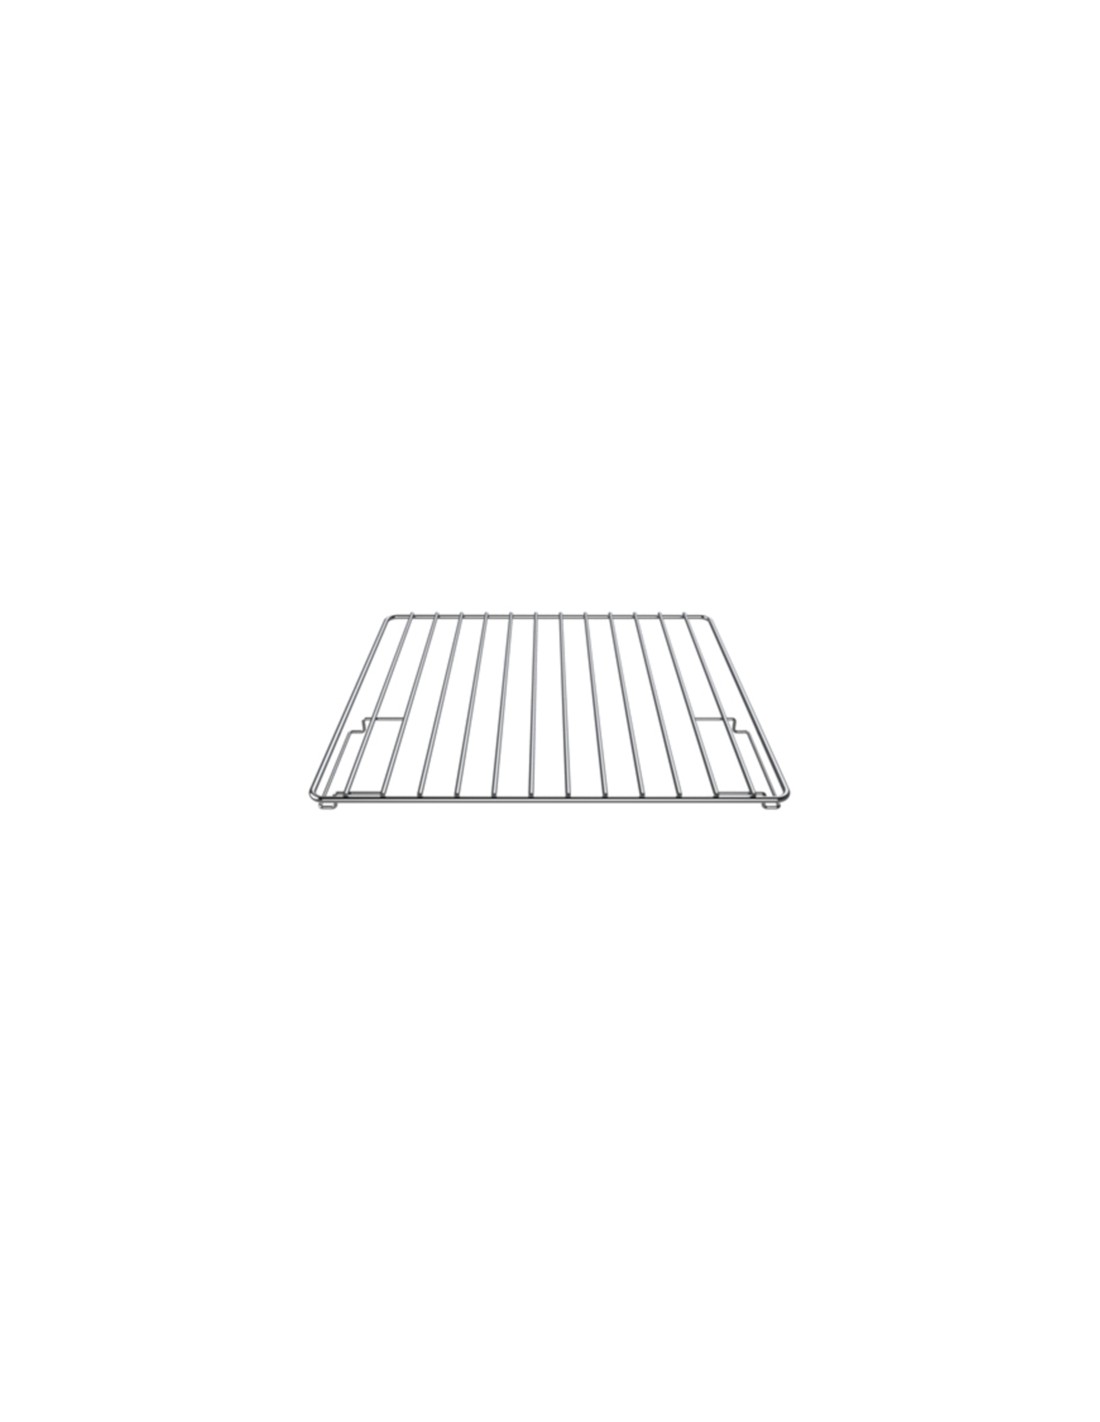 GN 2/3 stainless steel grid